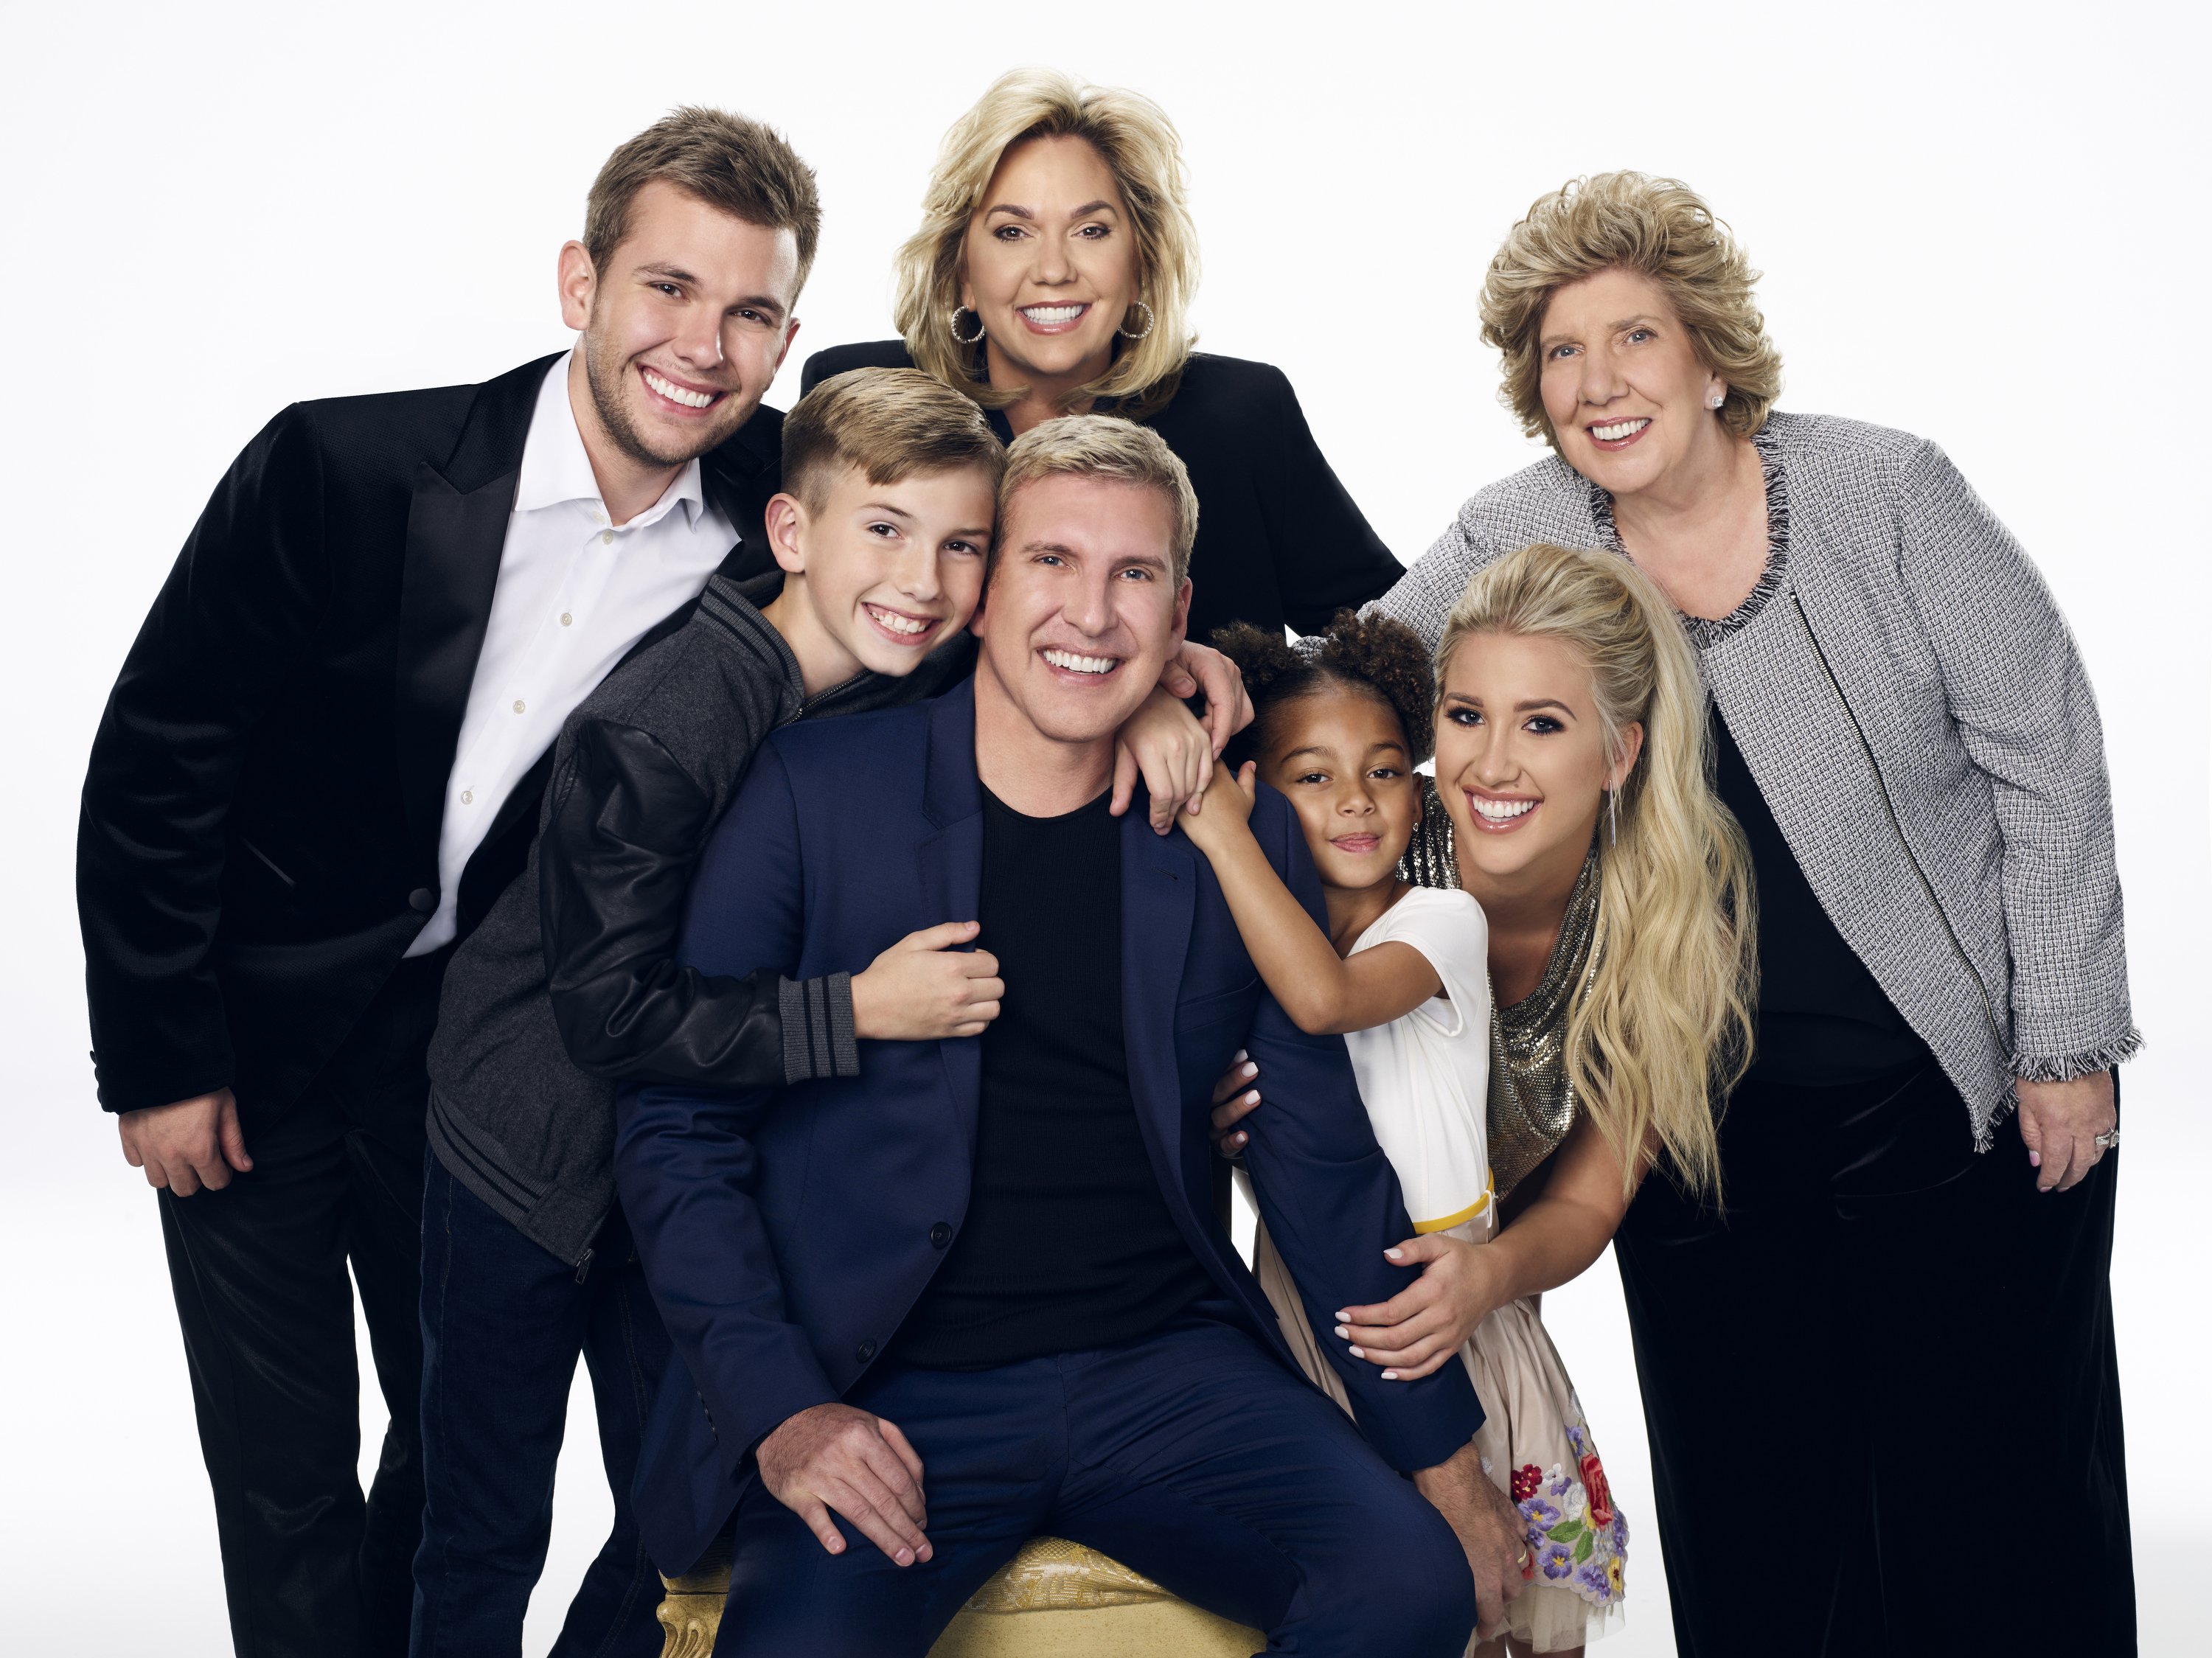 Chase, Grayson, Julie, Todd, Chloe, Savannah, and Faye Chrisley on season 6 of "Chrisley Knows Best" on December 10, 2017 | Source: Getty Images